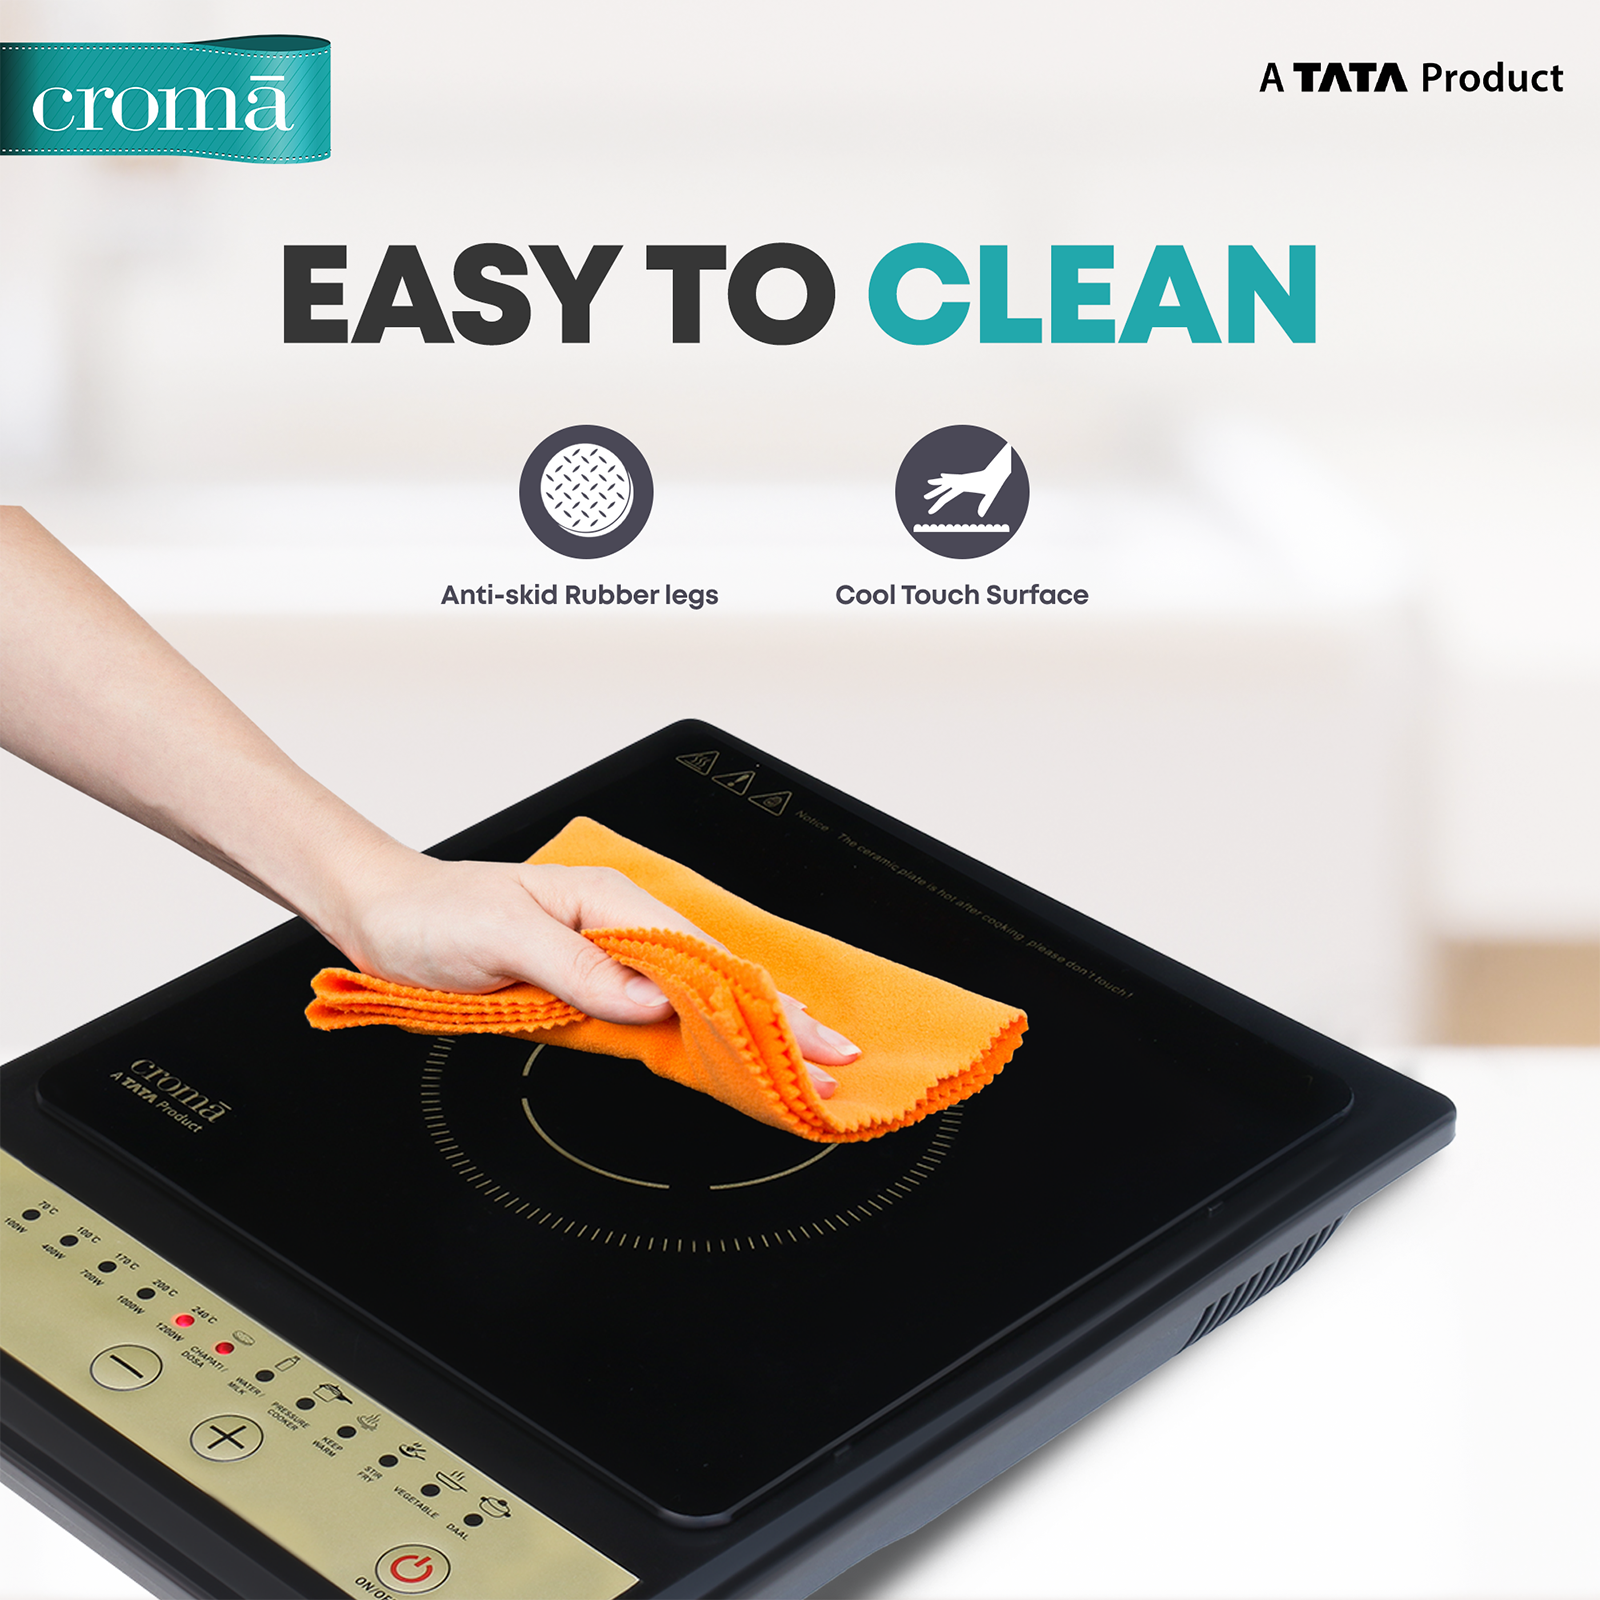 Buy Croma 1200W Induction Cooktop with 7 Preset Menus Online - Croma